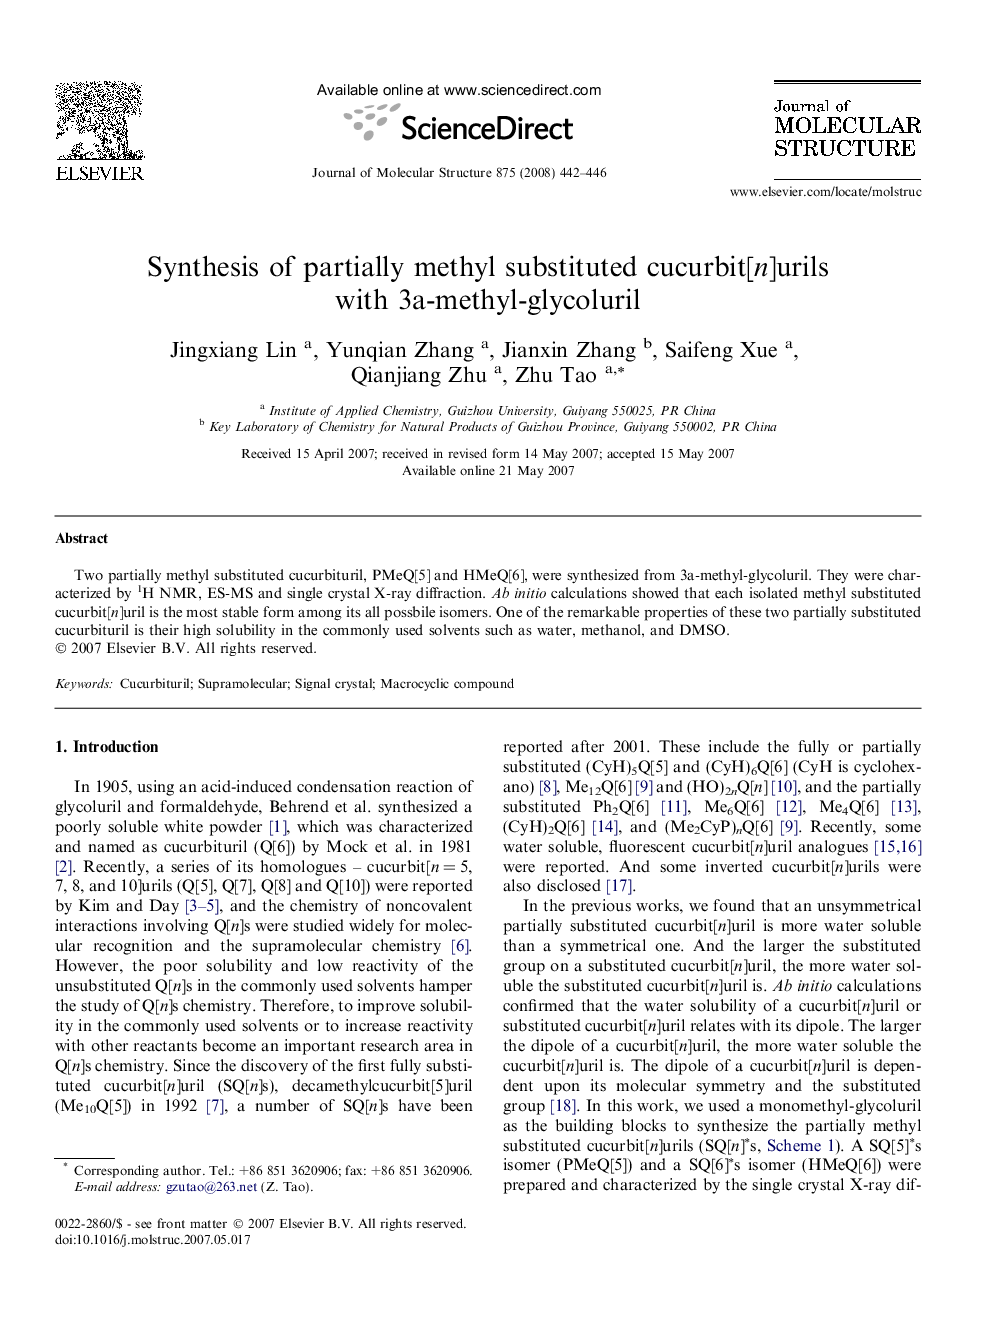 Synthesis of partially methyl substituted cucurbit[n]urils with 3a-methyl-glycoluril